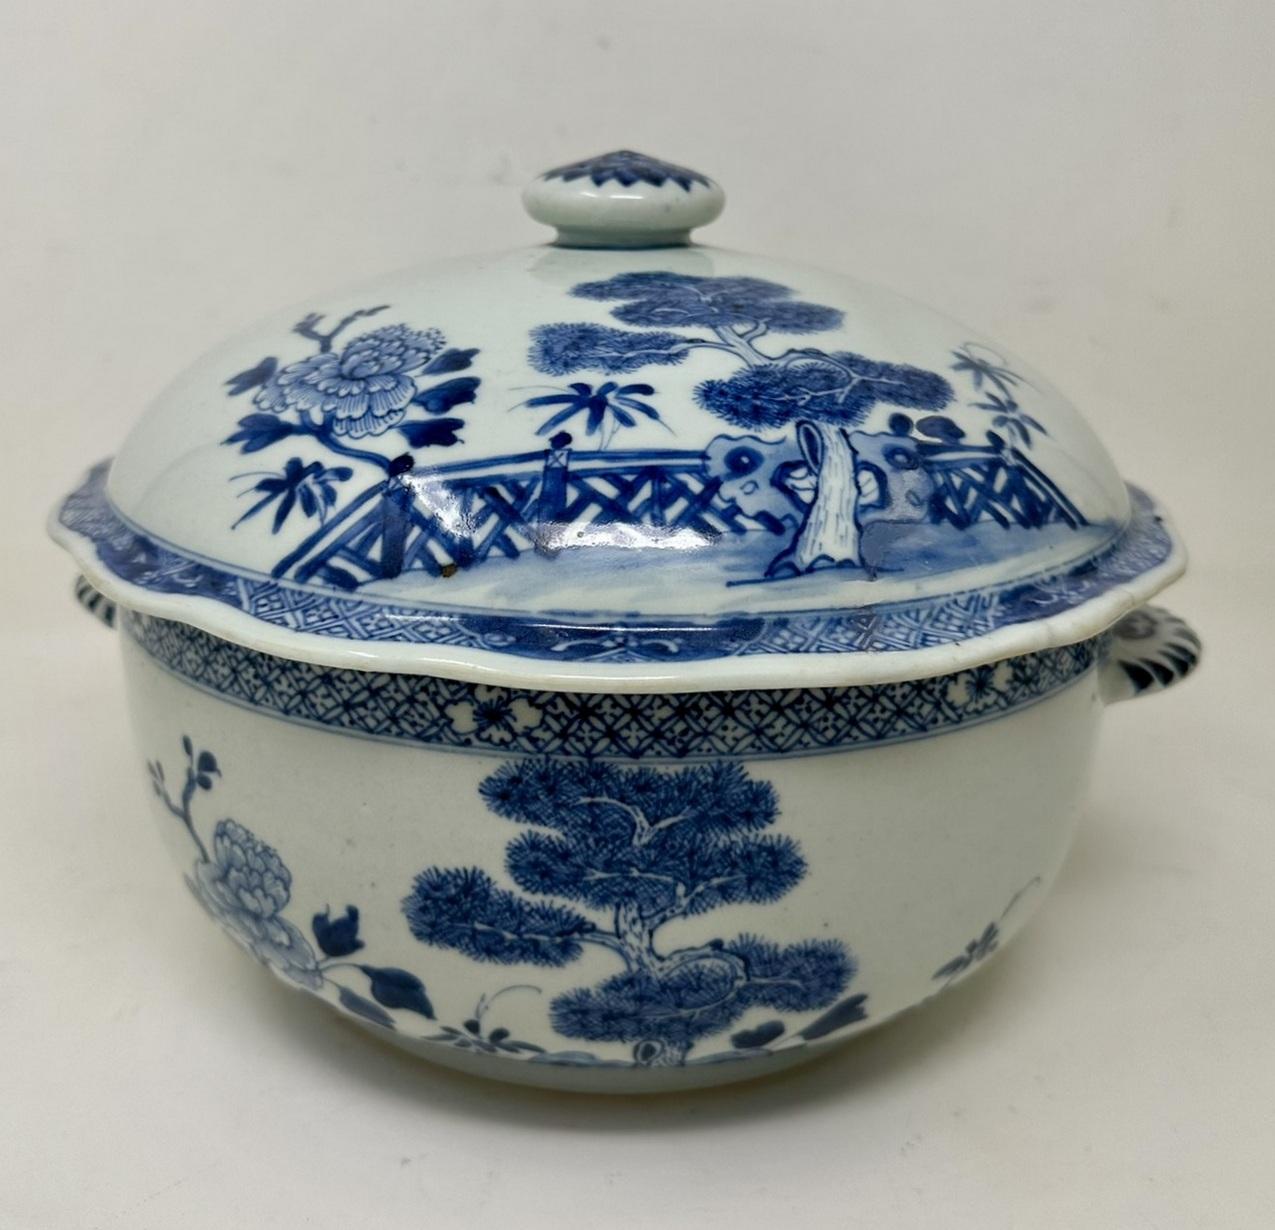 Antique Chinese Export Porcelain Blue White Chien Lung Soup Tureen Centerpiece In Good Condition For Sale In Dublin, Ireland